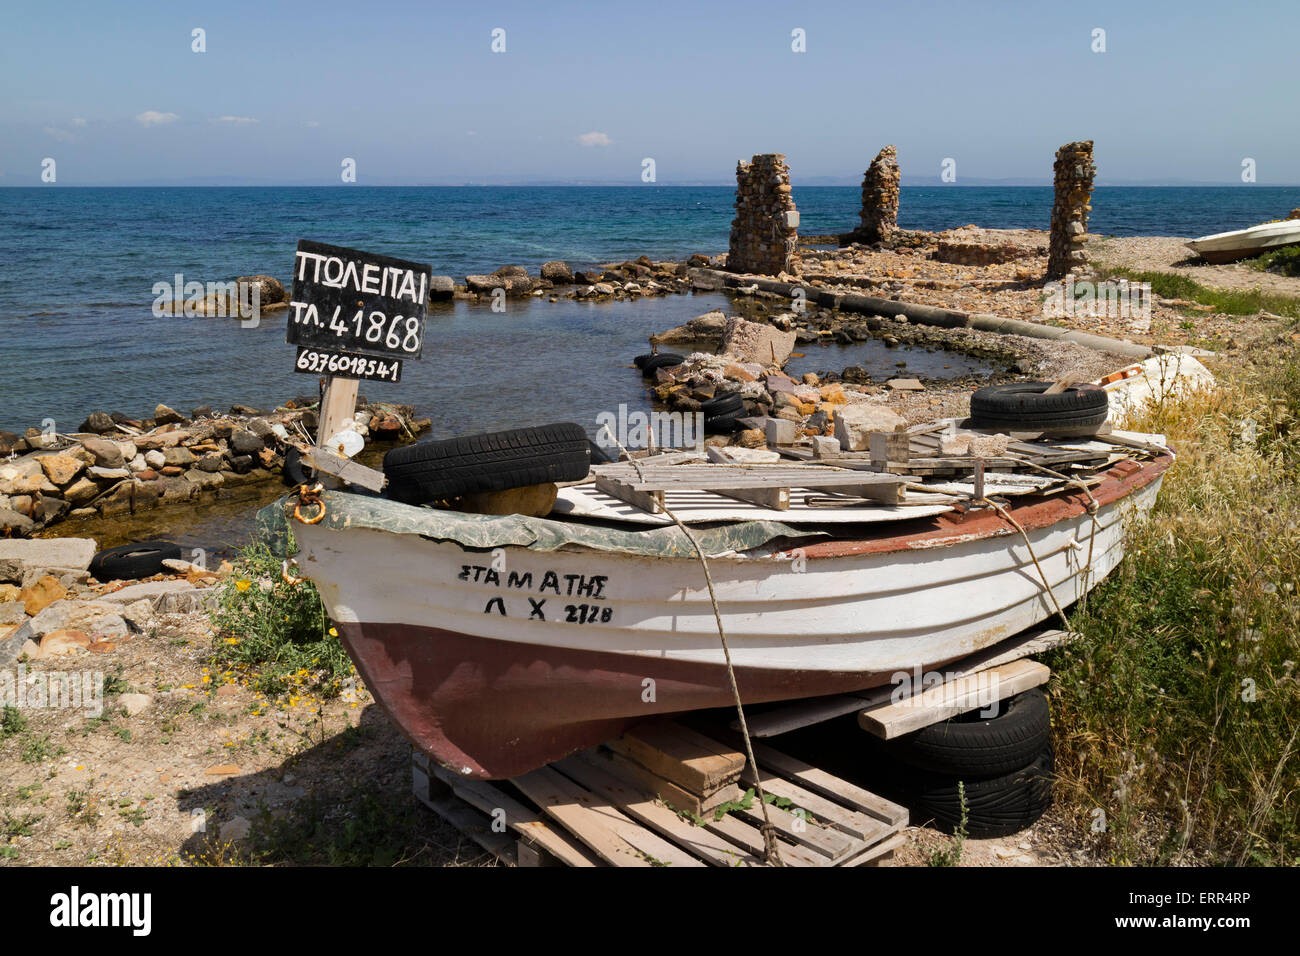 Little fishers boat on the Aegean Sea for sale on the isle of Chios, Greece with stone ruins in the background Stock Photo